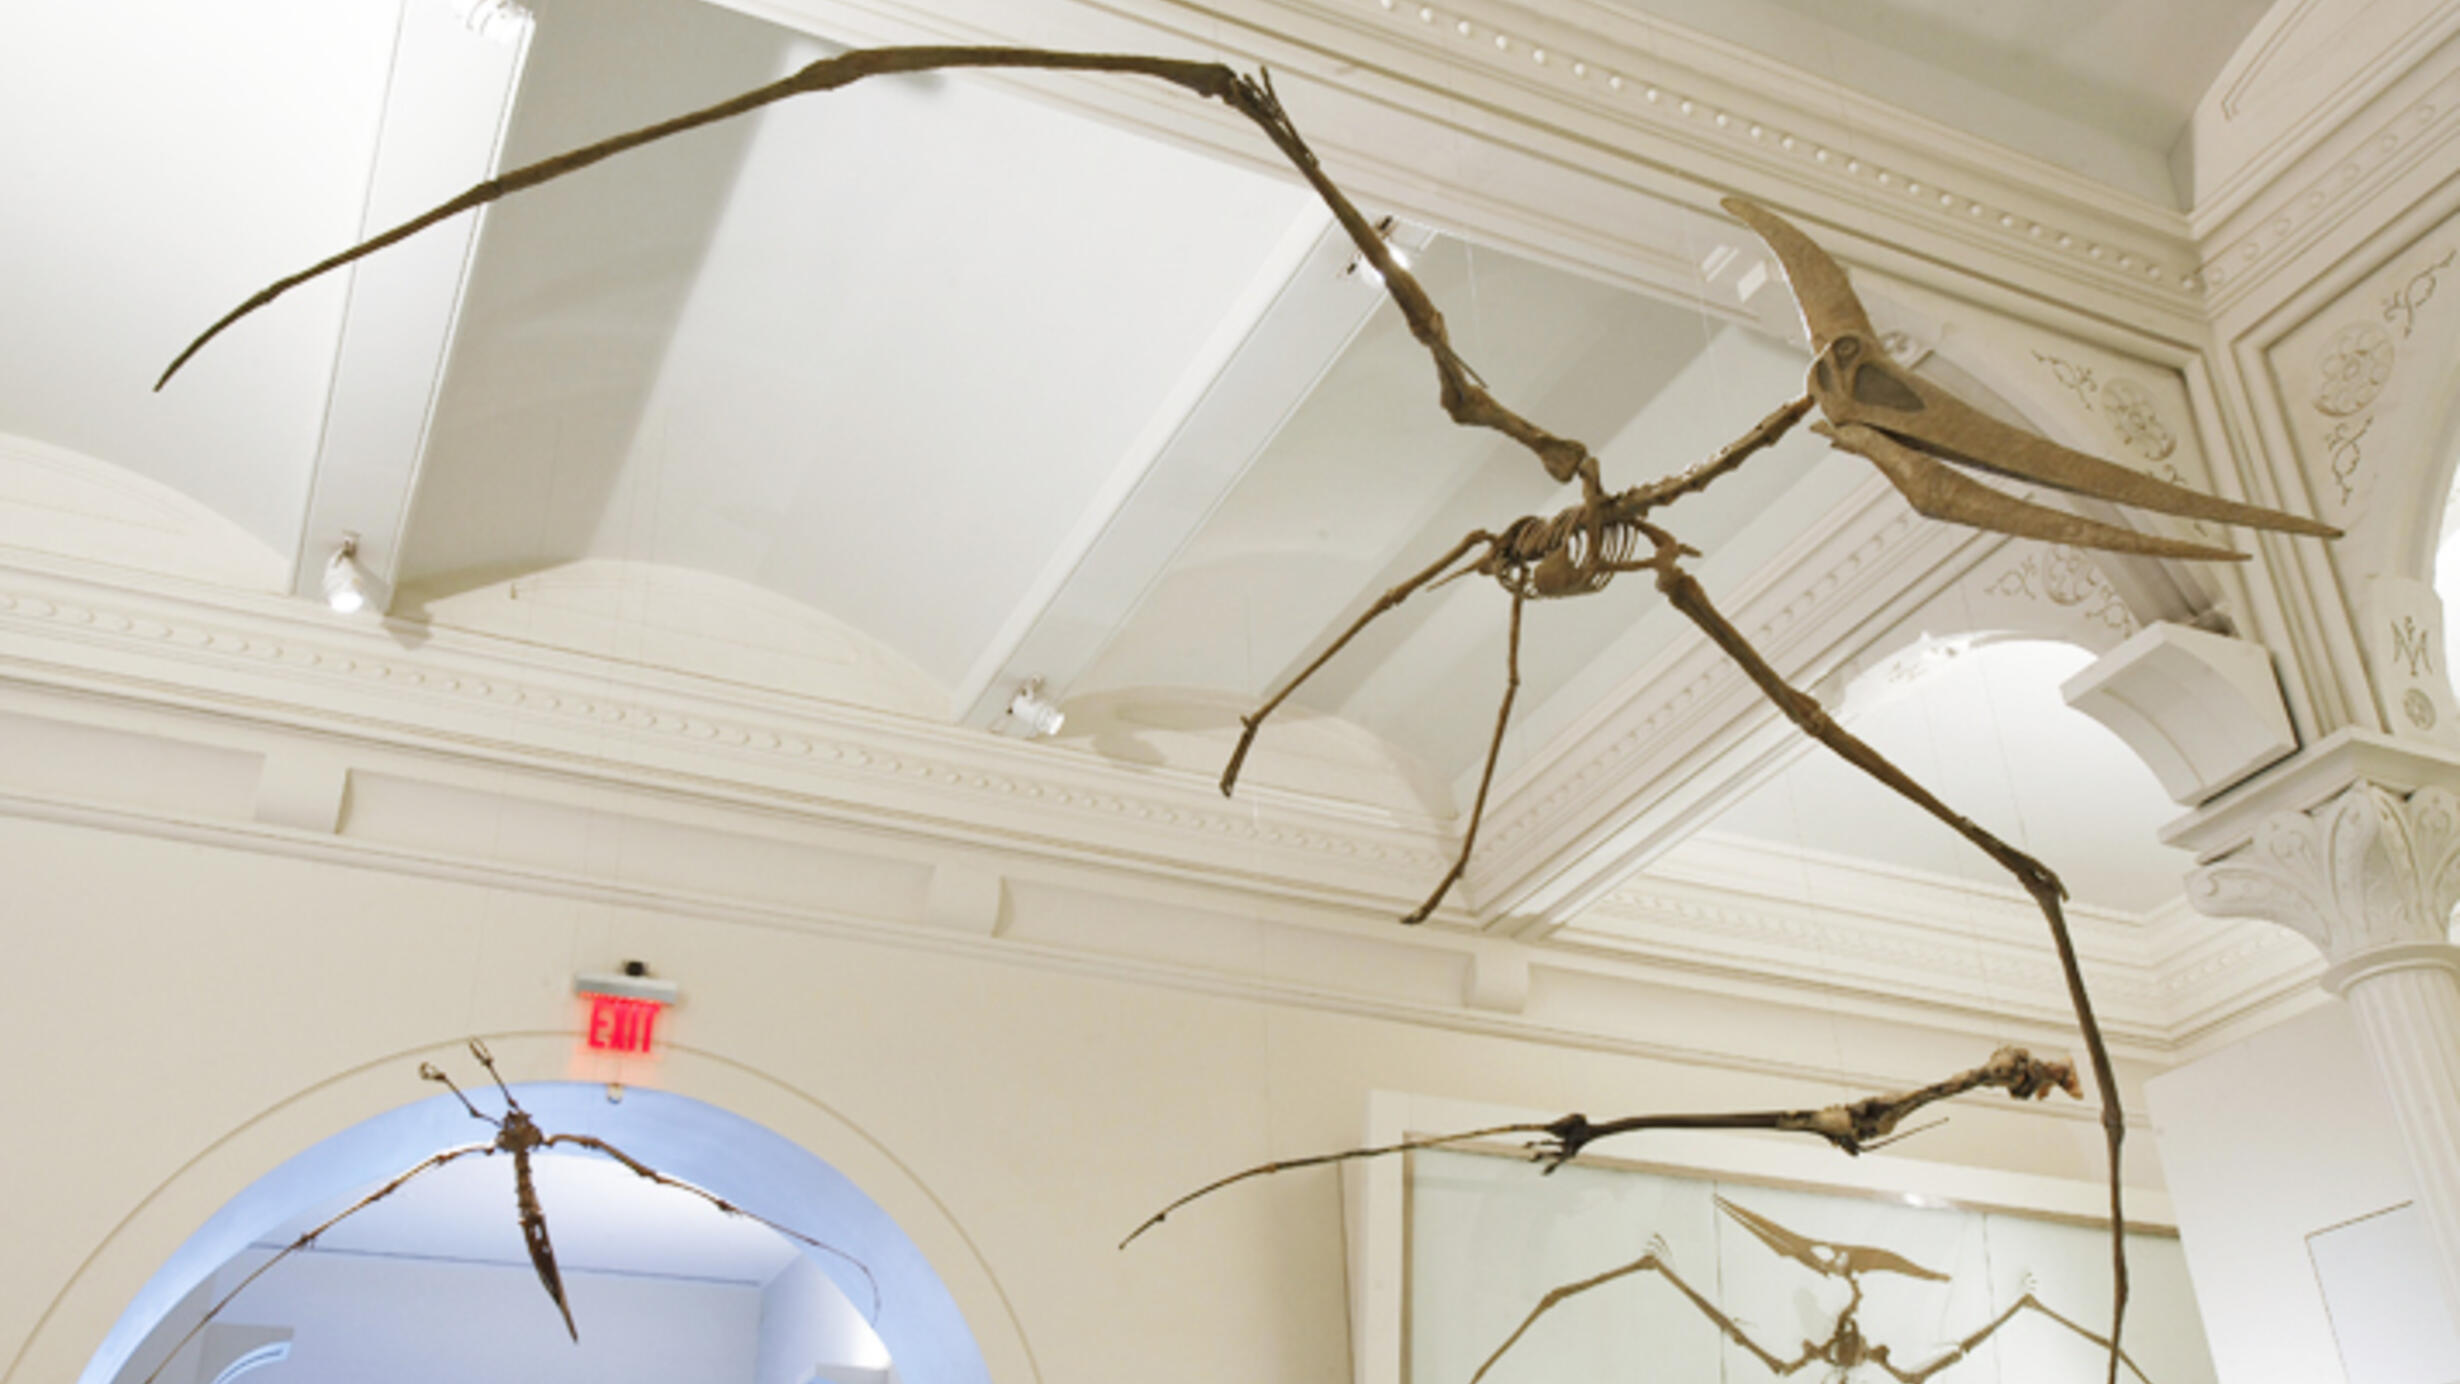 In the Museum’s Hall of Vertebrate Origins, a pterosaur skeleton is suspended from the ceiling.